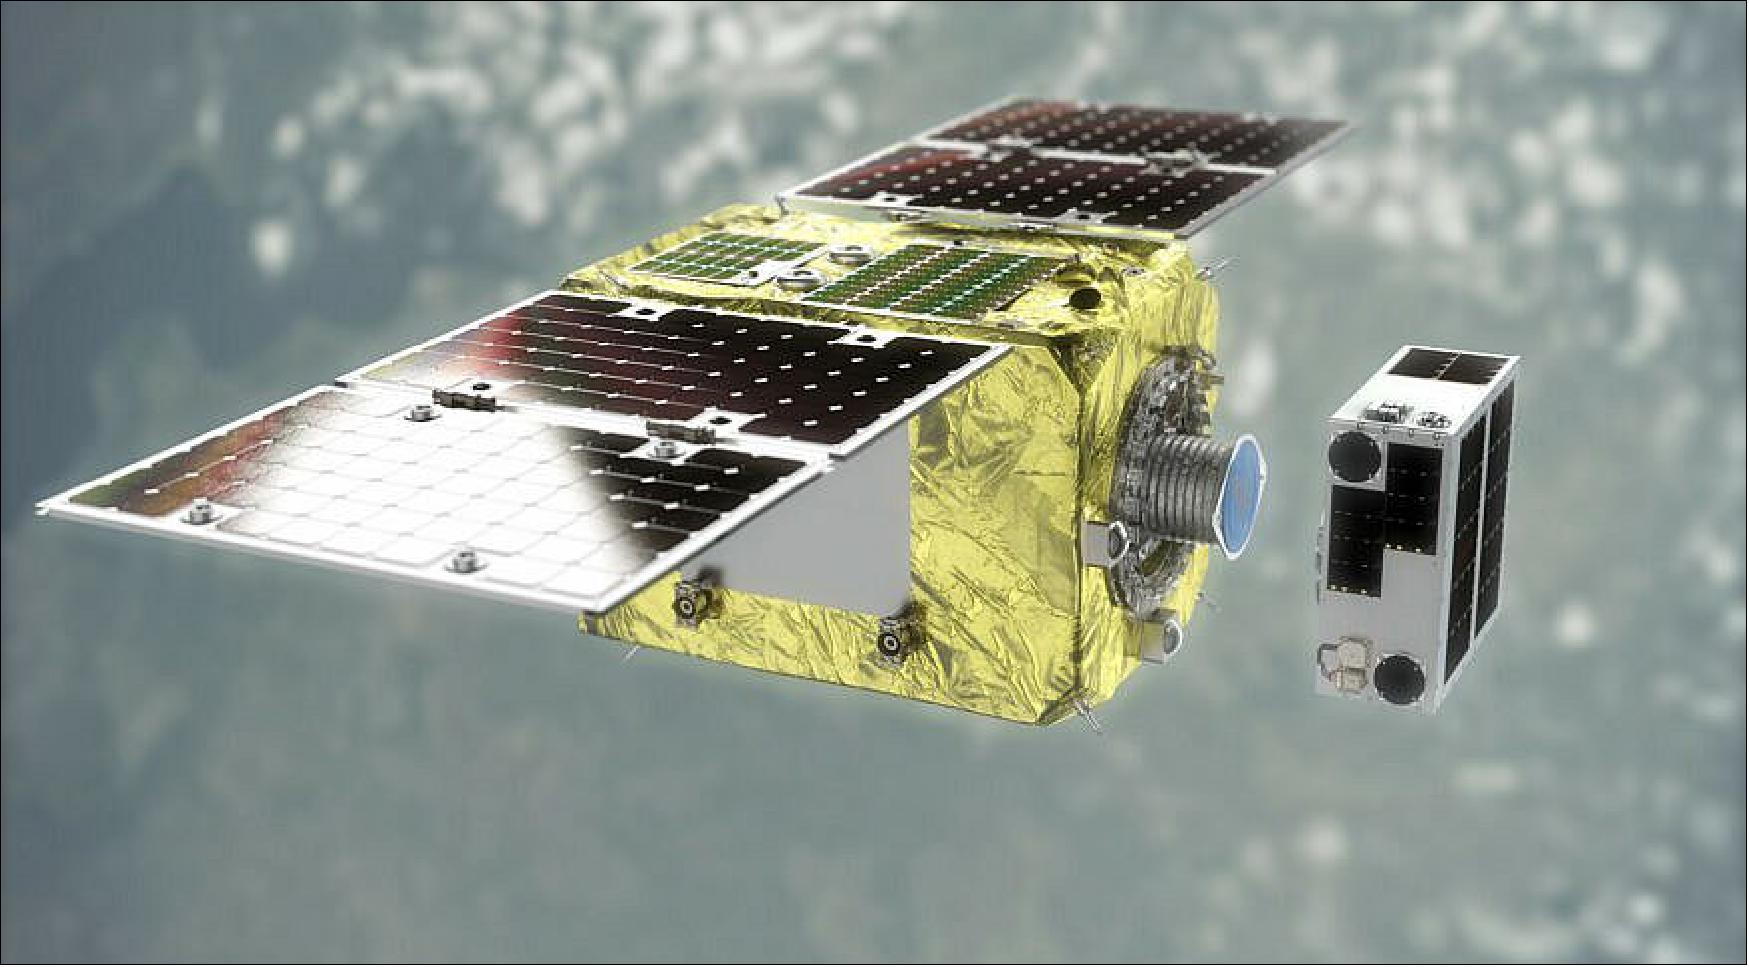 Figure 60: Artist rendering of Astroscale's End-of-Life Services by Astroscale demonstration (ELSA-d), image credit: Astroscale)